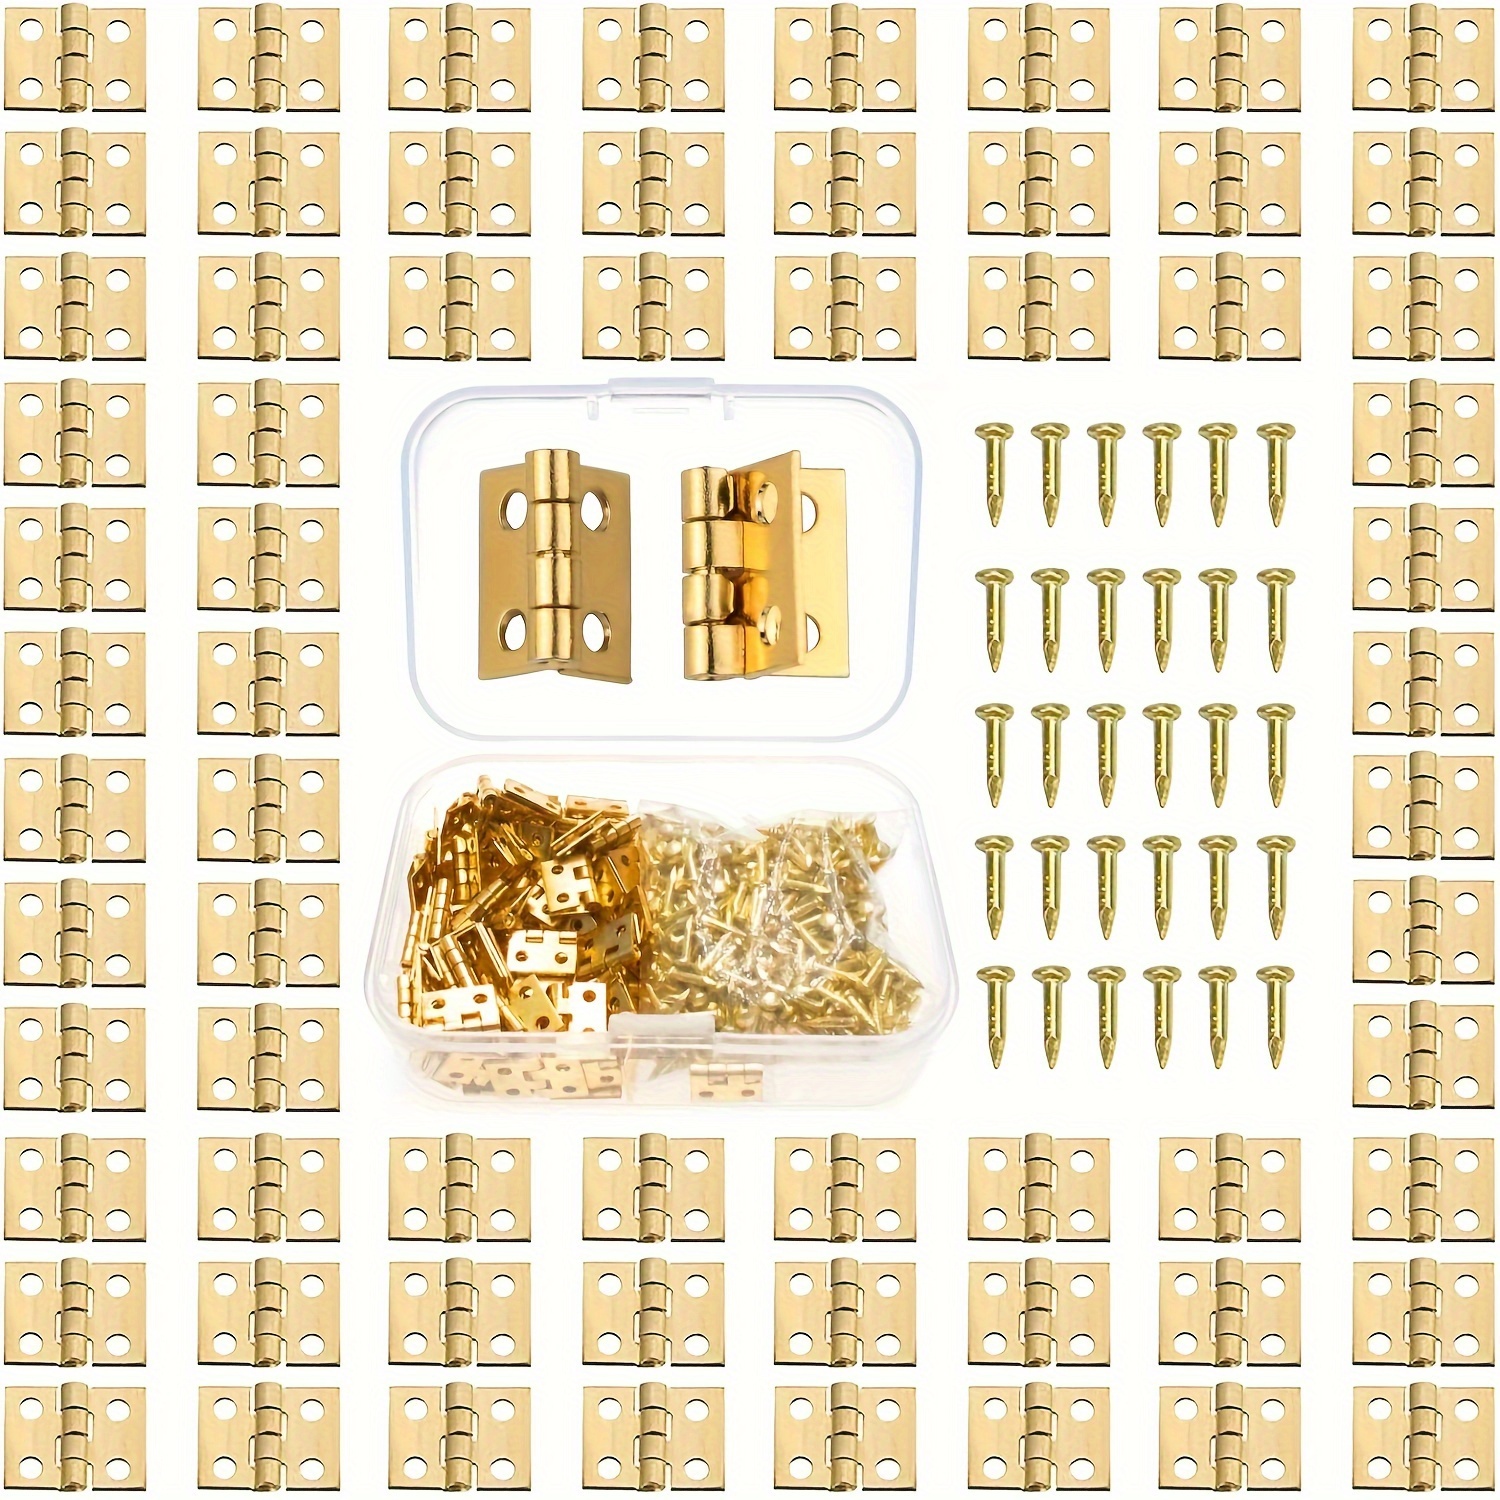 10 Pieces Gold 8mm x 10mm SMALL miniature hinges Doll House TINY HINGE  micro E7